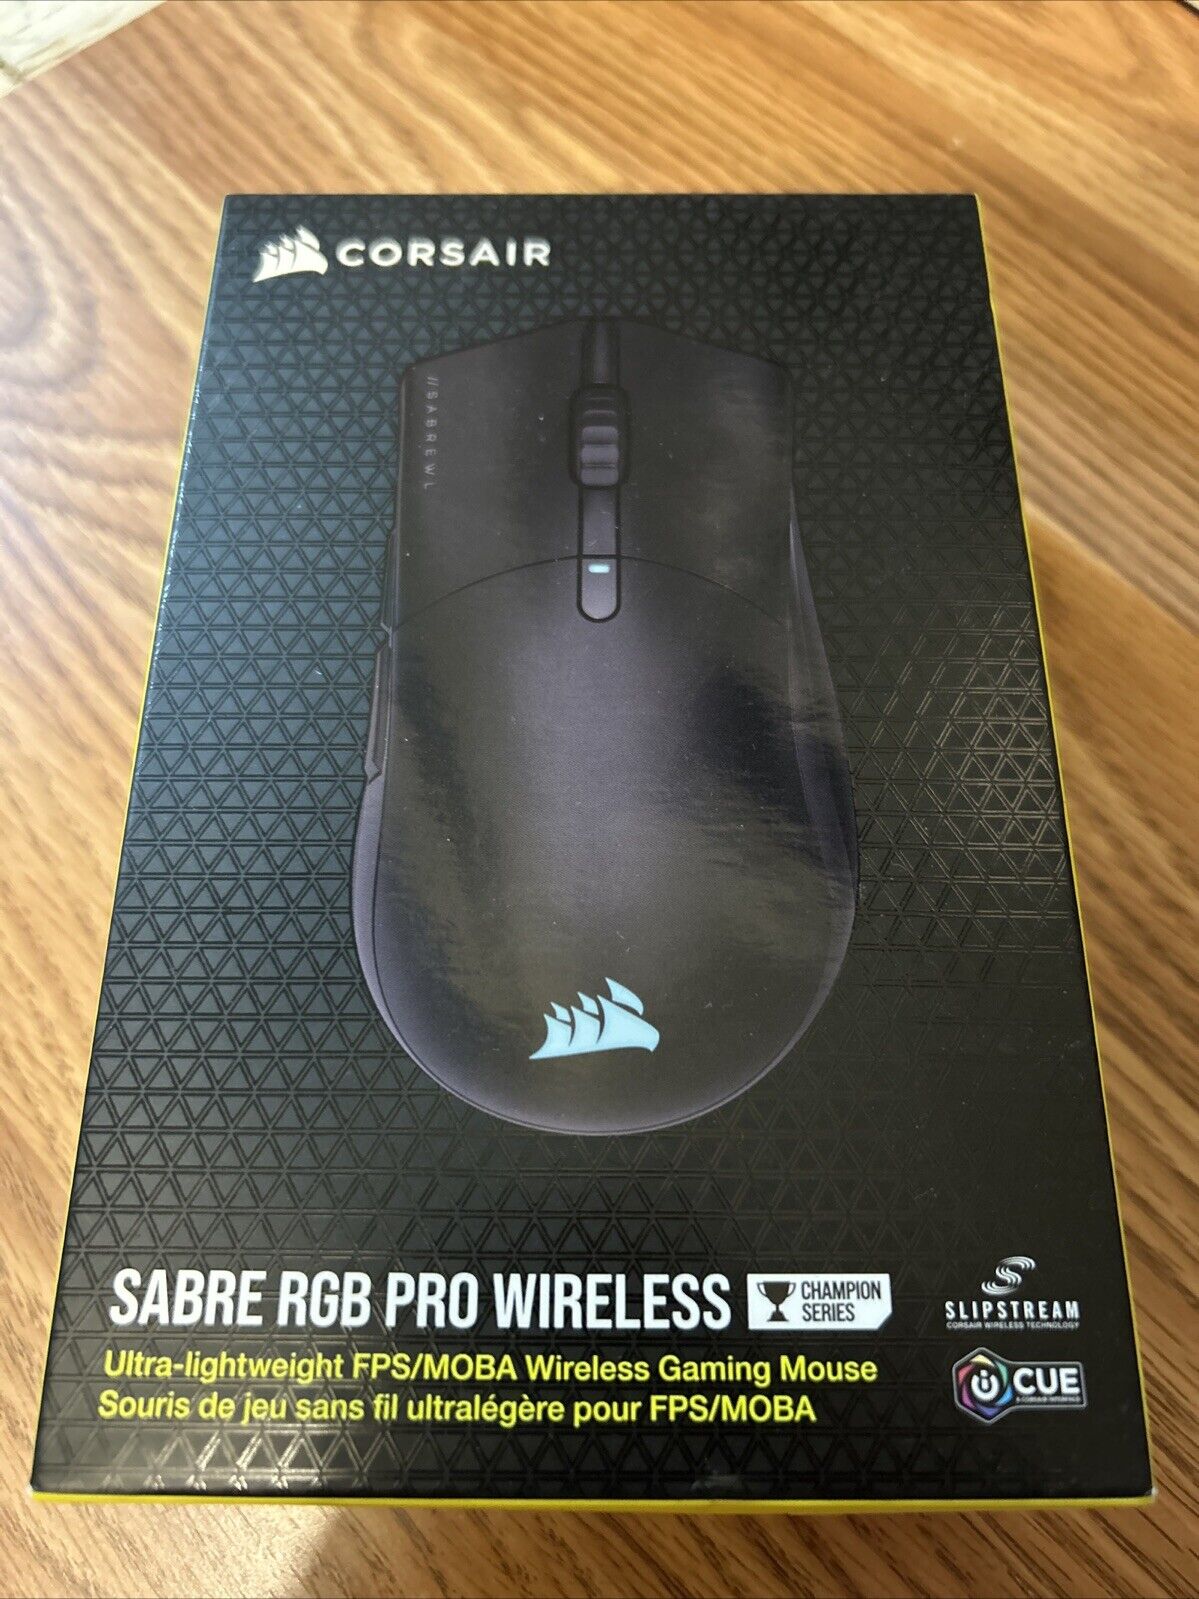 New Corsair SABRE RGB PRO Wireless CHAMPION SERIES Lightweight Gaming Mouse